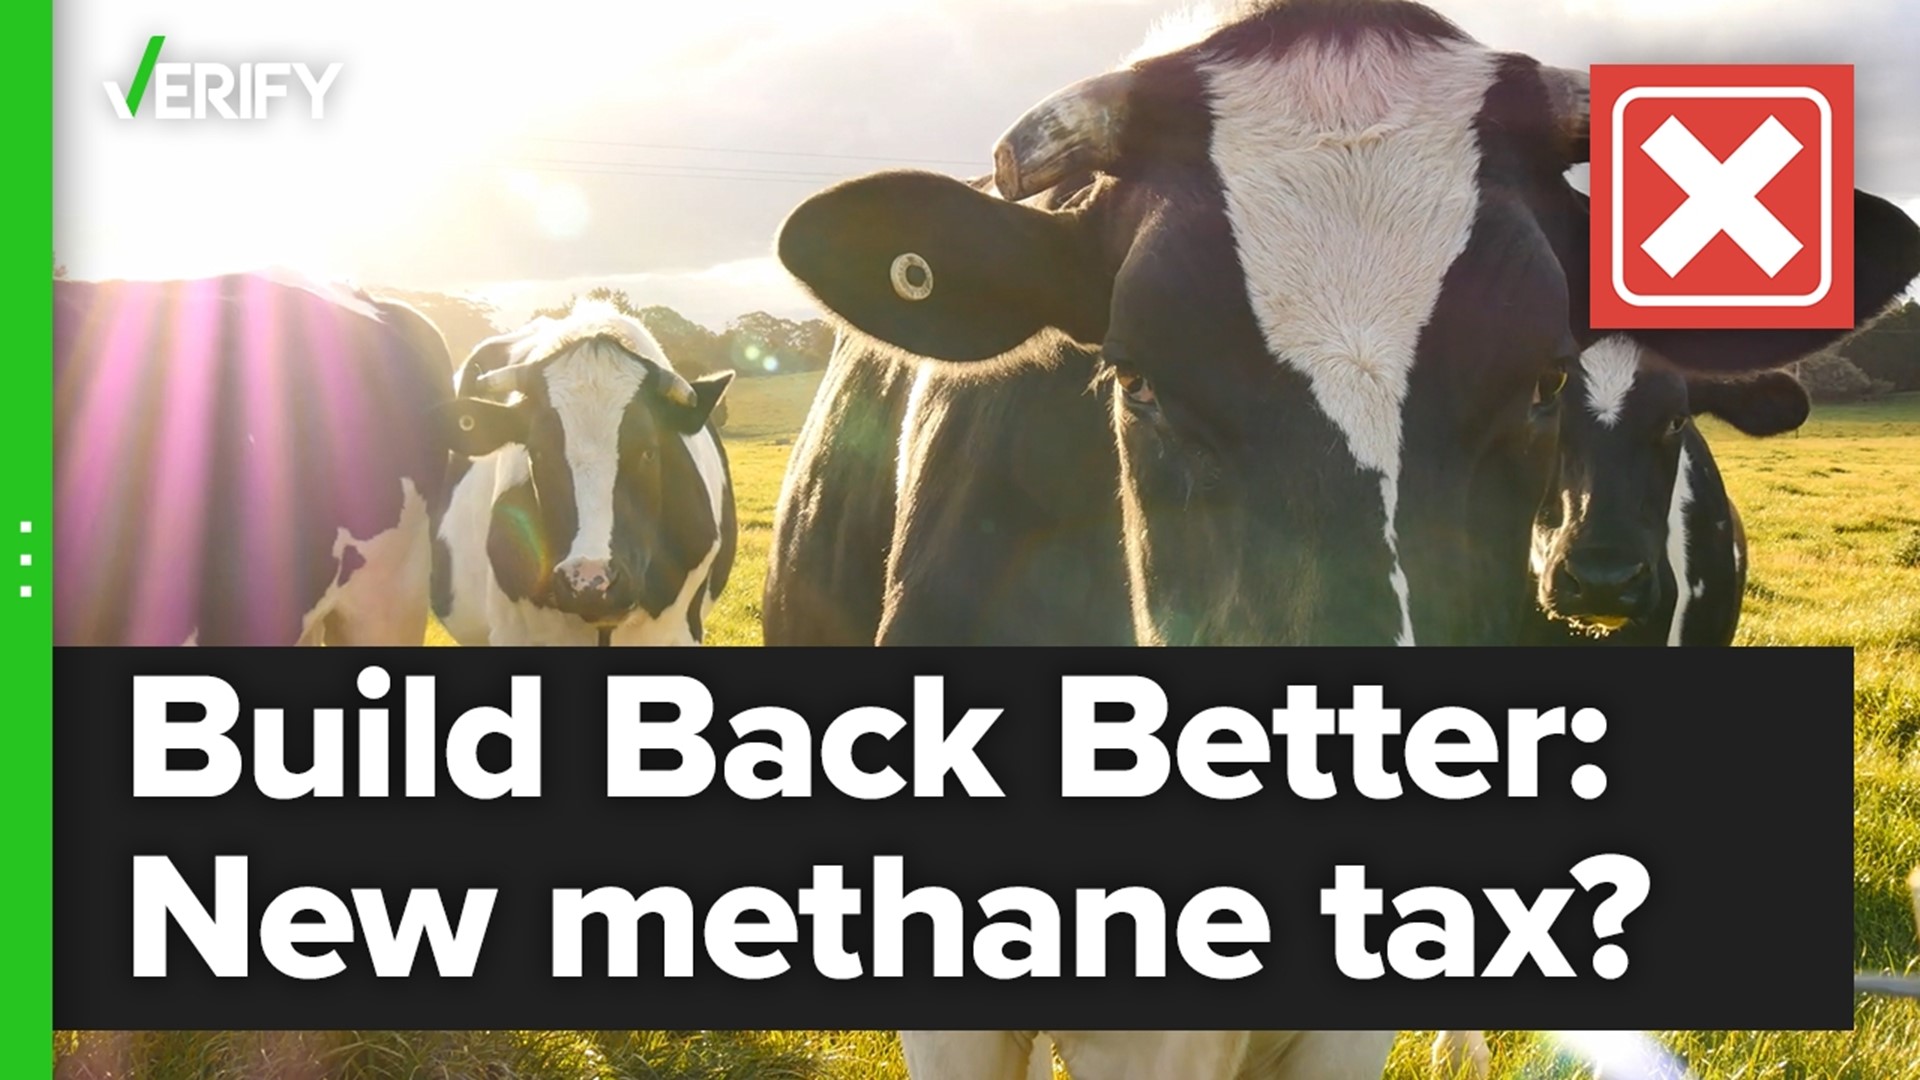 Does the “Build Back Better” bill include a methane tax on livestock? We went to work fact checking this claim and according to the American Farm Bureau Federation a